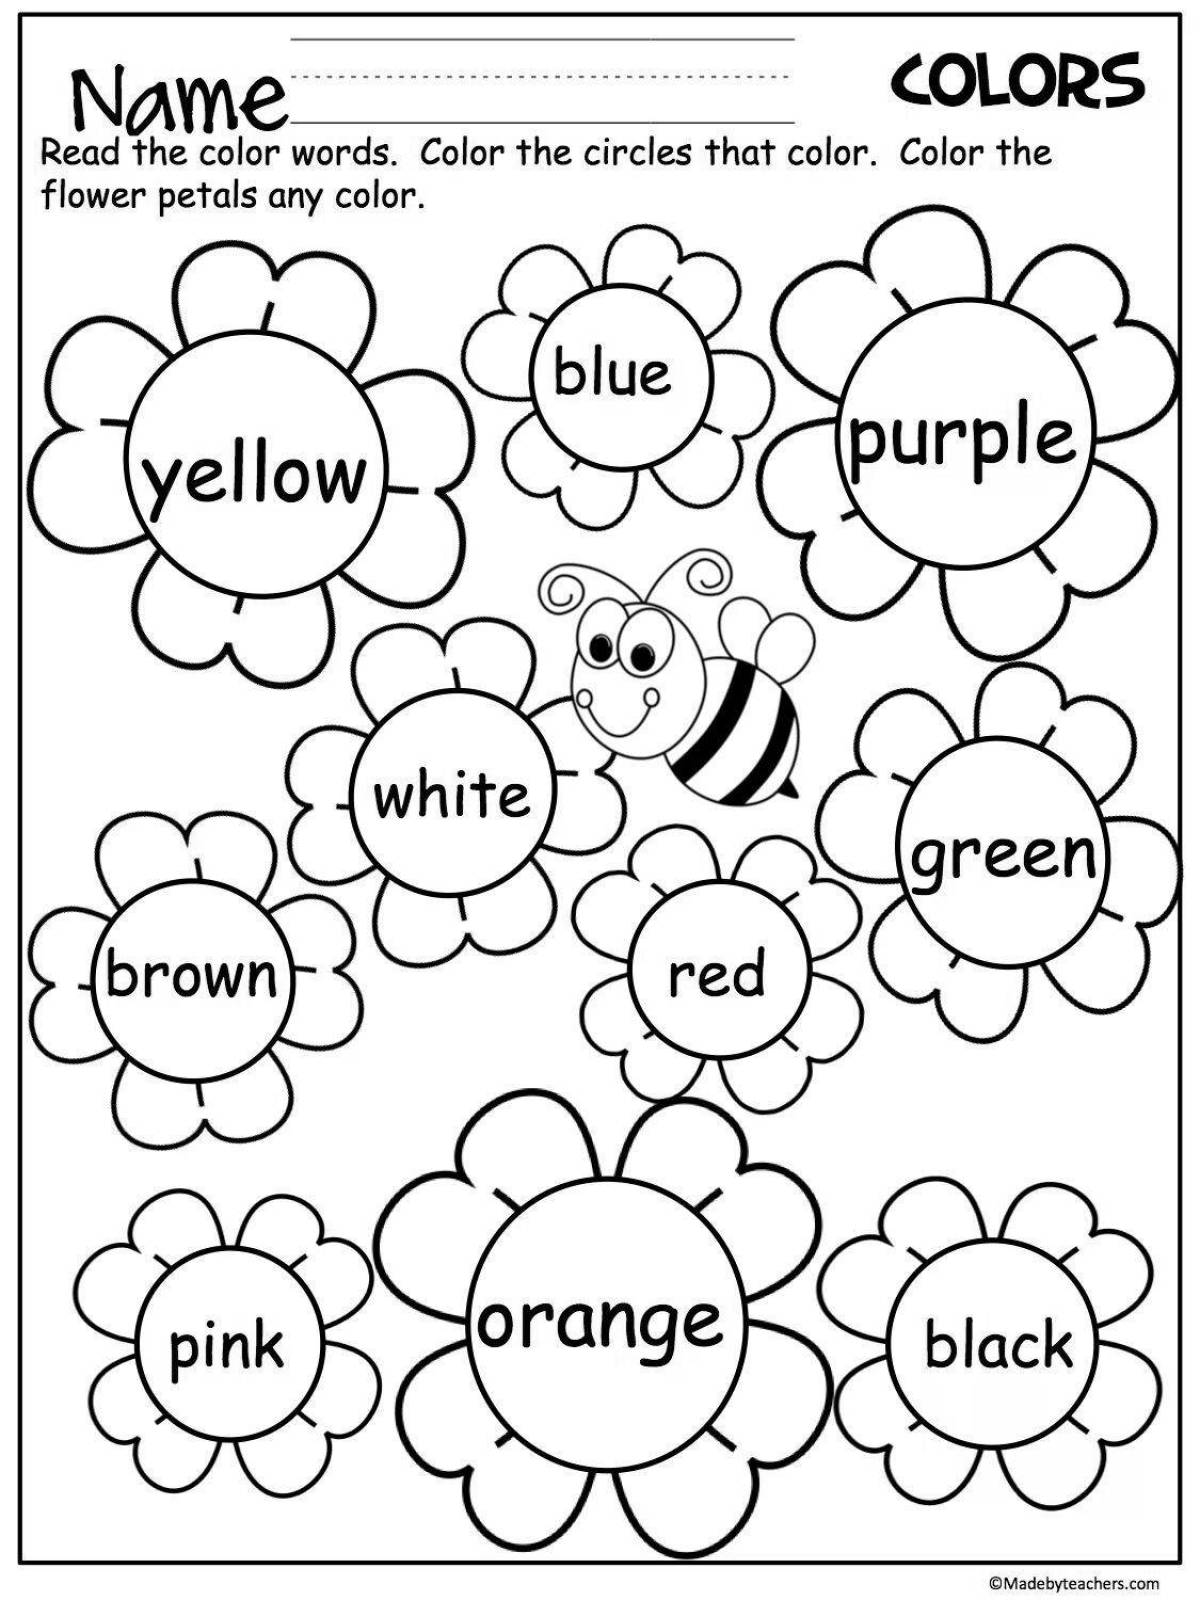 Bright coloring with assignment for grade 2